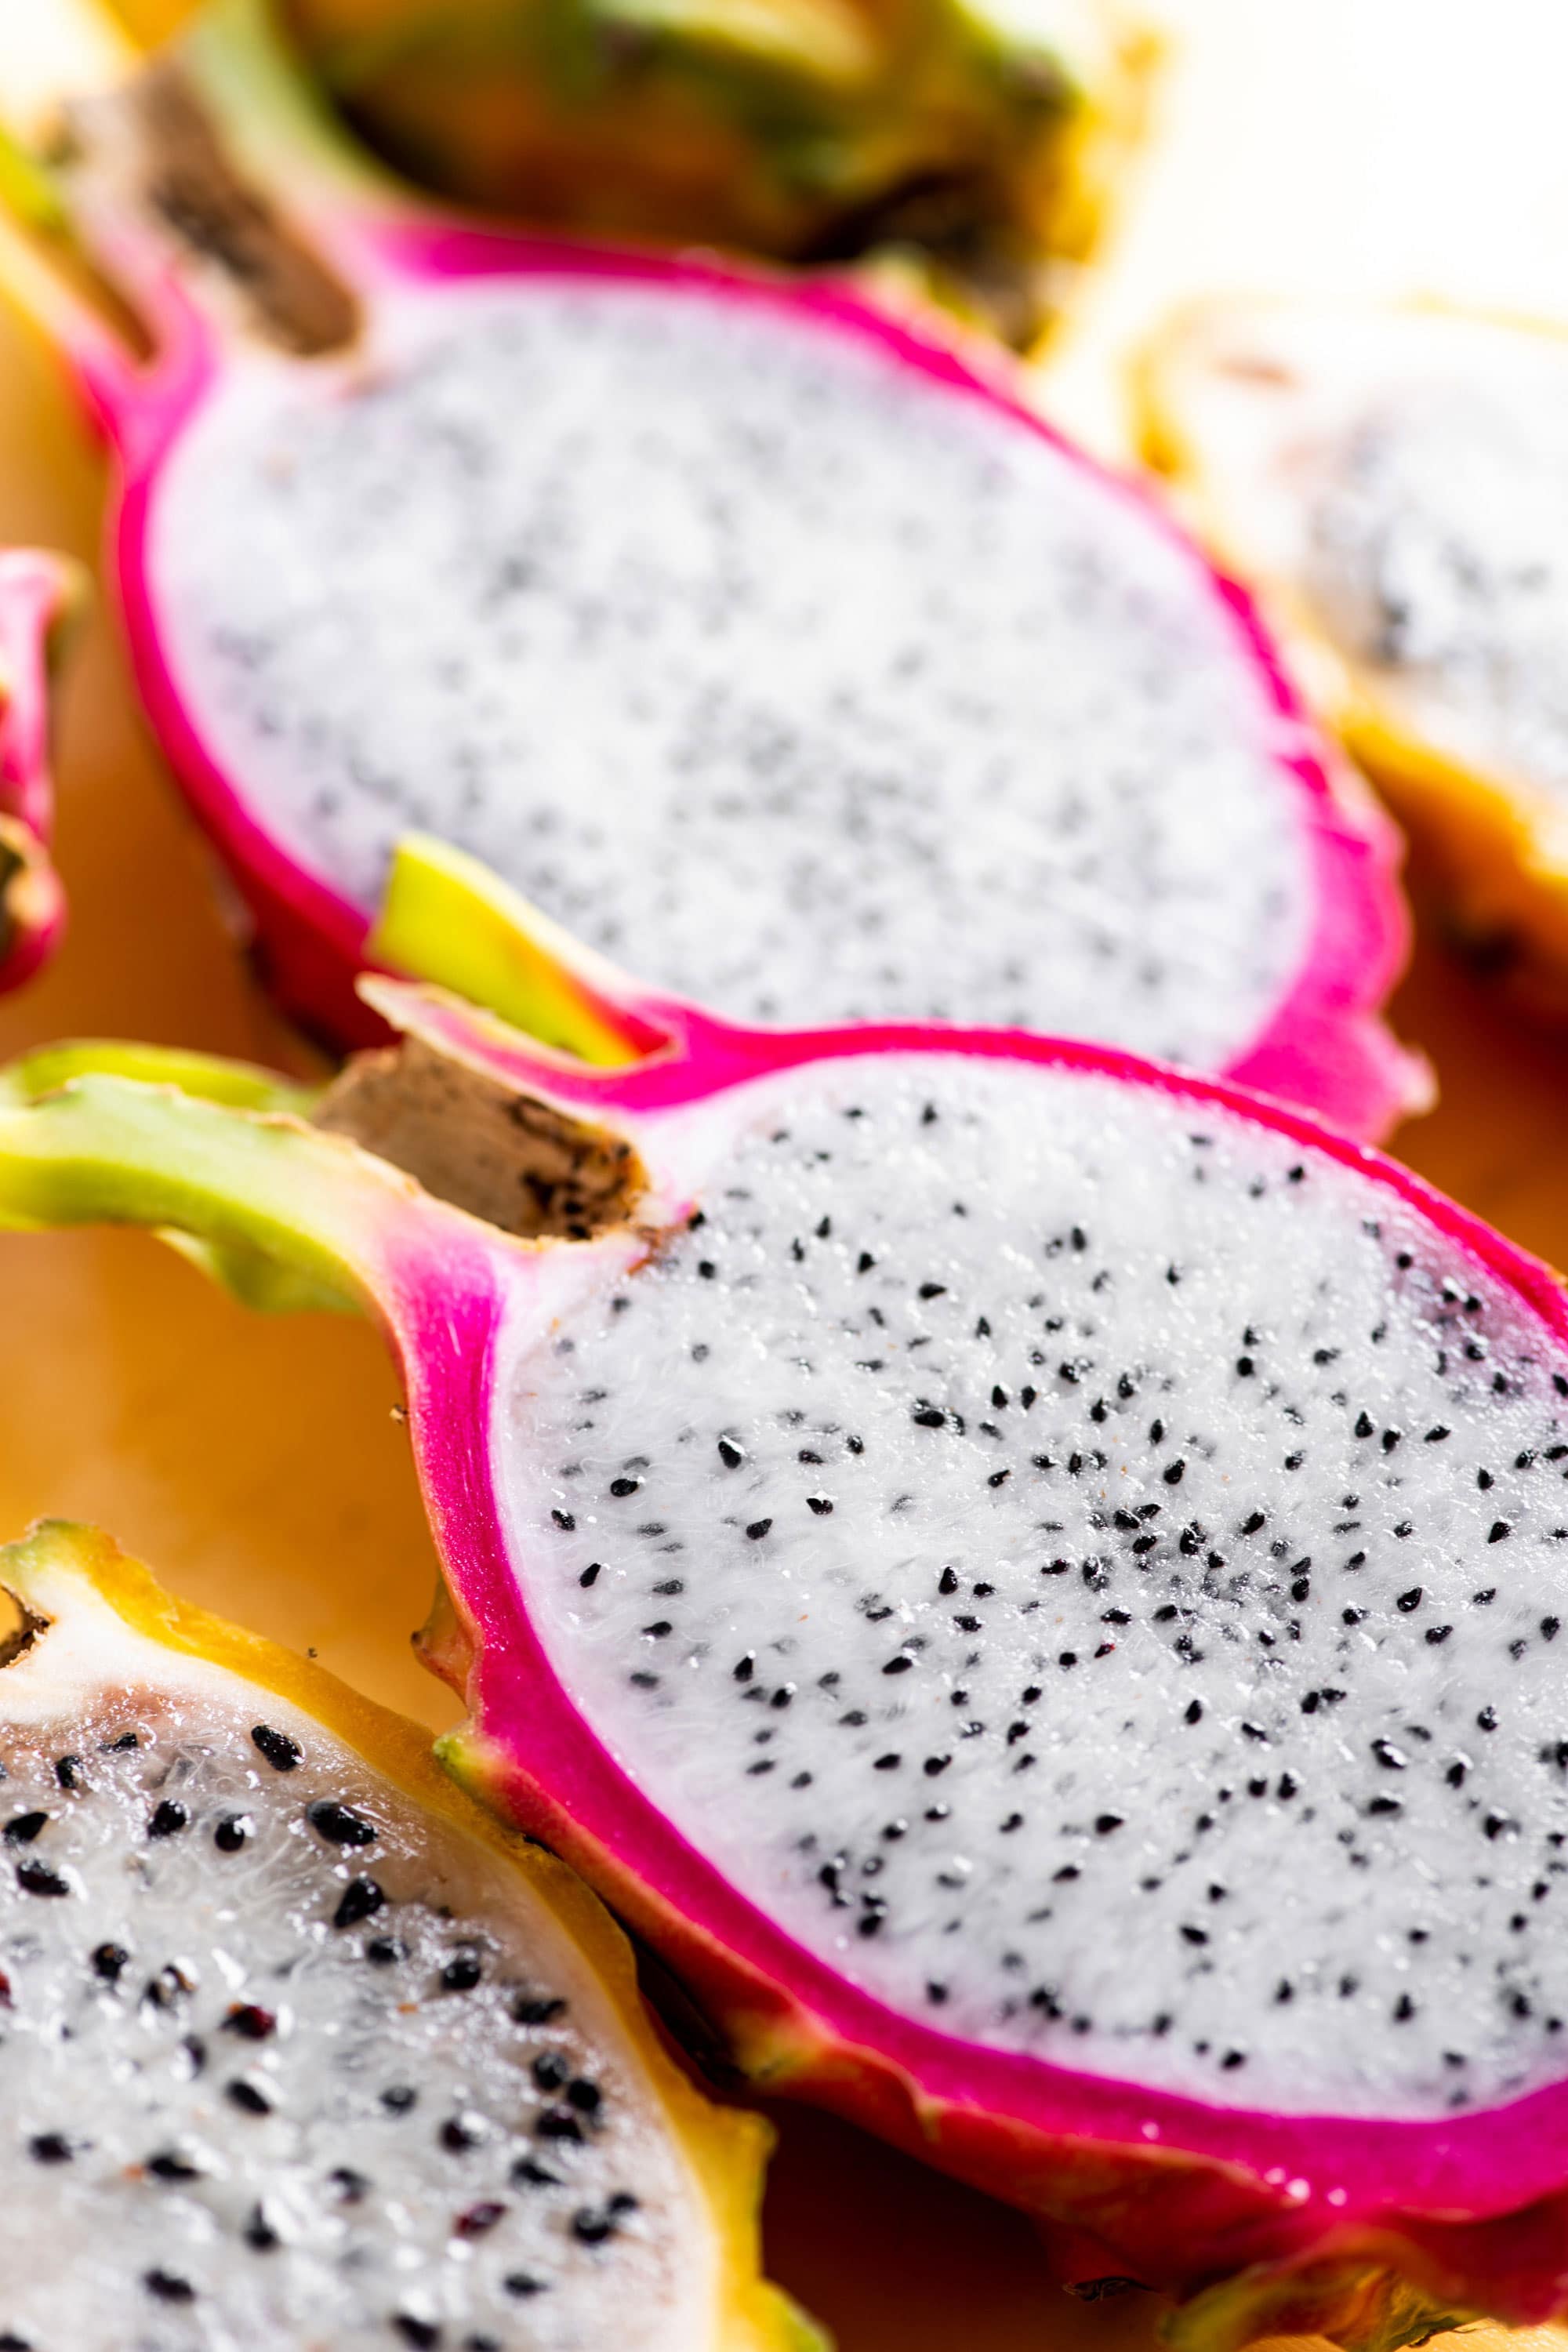 Pink dragon fruit sliced in half to show white interior with black seeds with yellow sliced dragon fruit nearby.